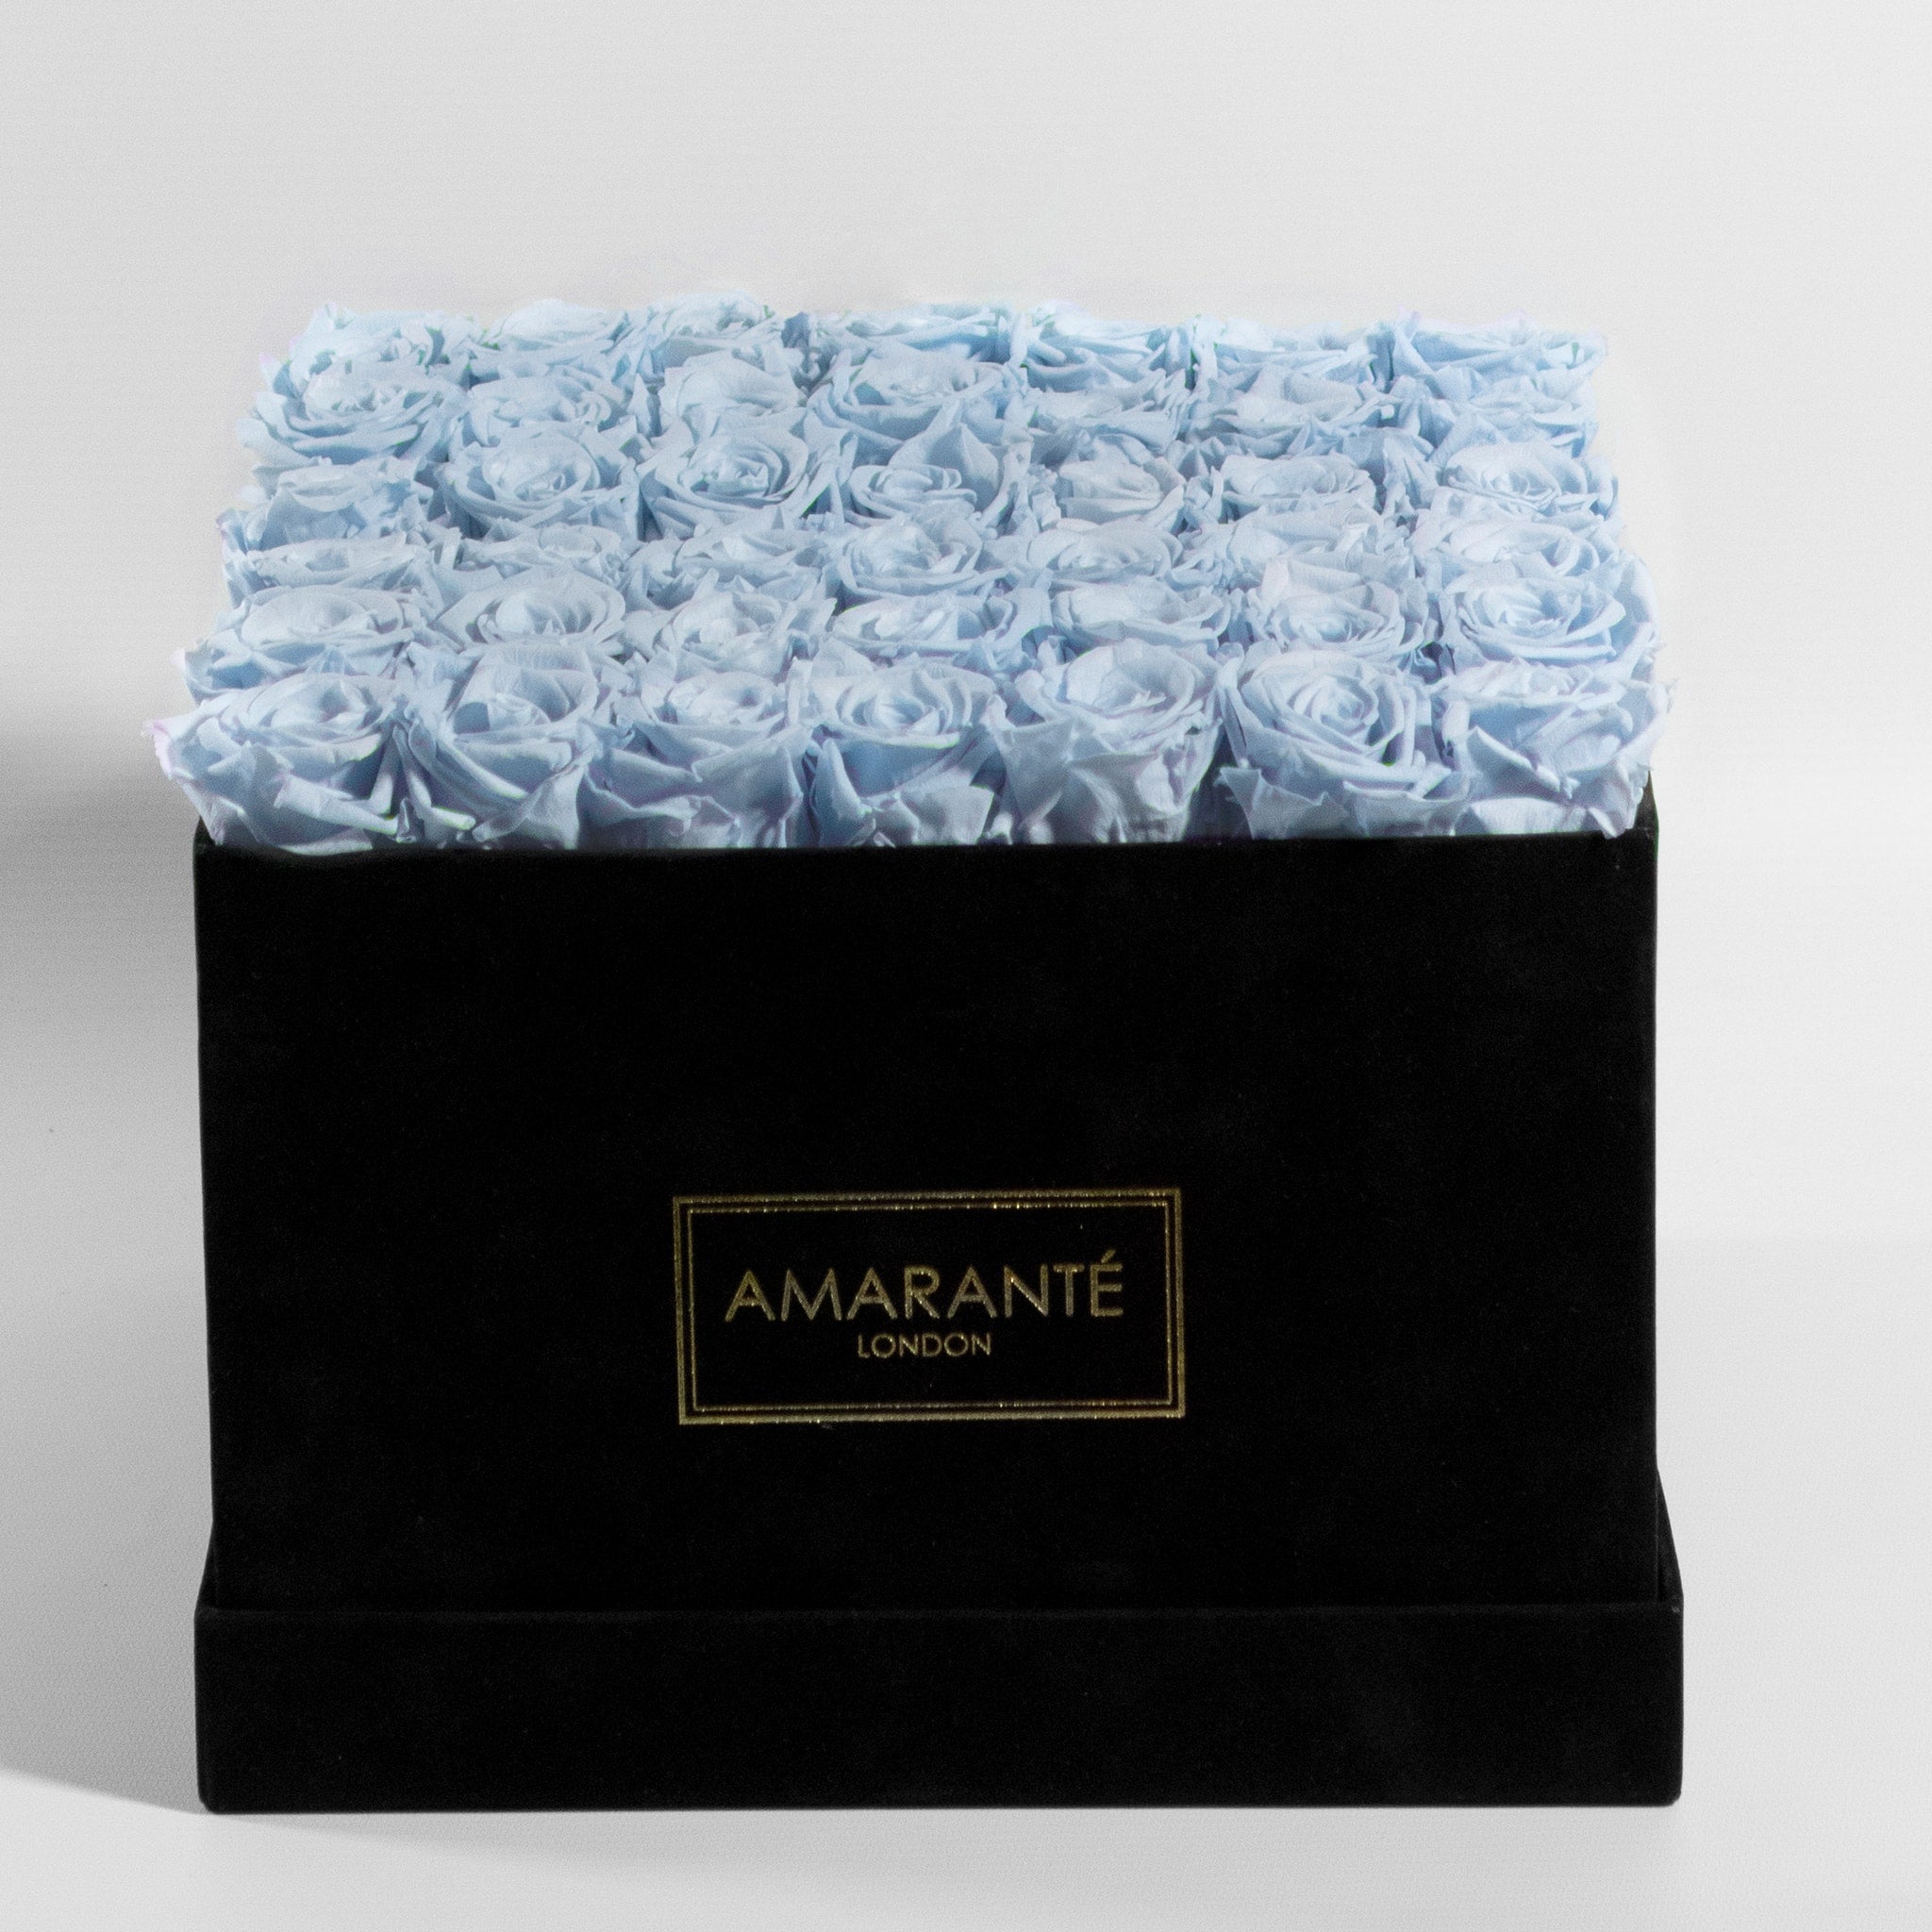 Cool light blue Roses in a modern black extra box, implying protection and security. 